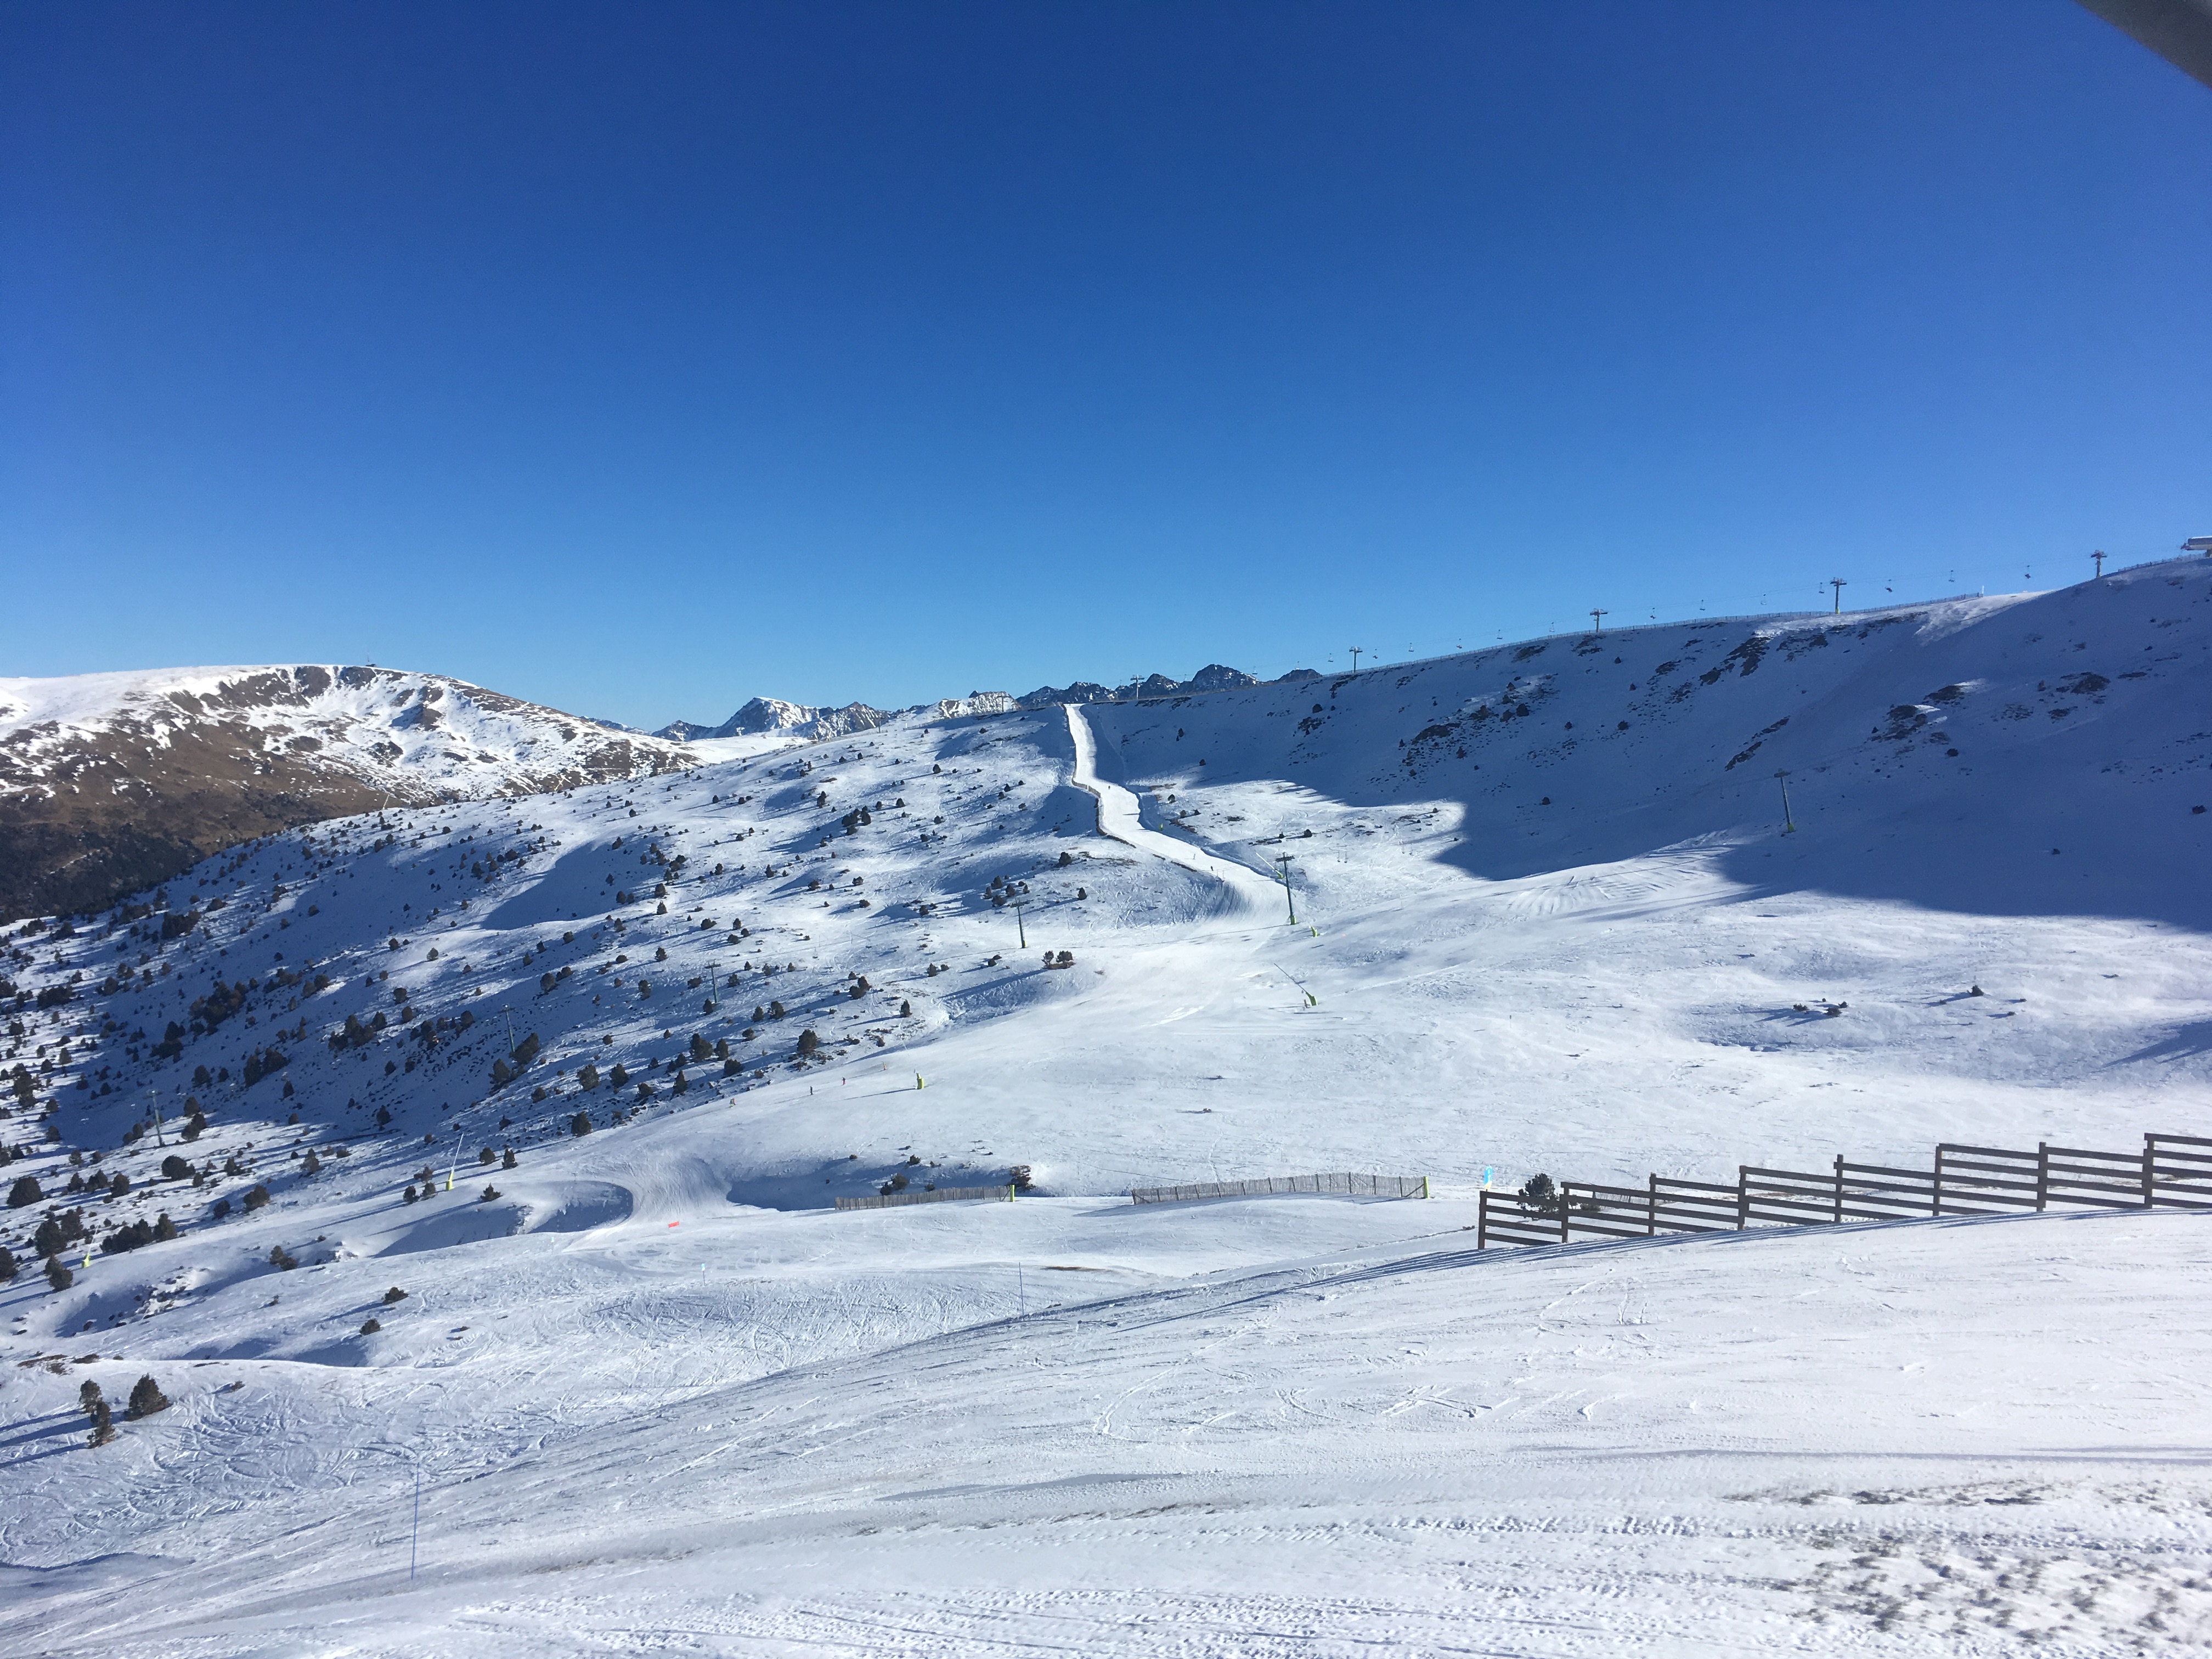 Bluebird day - admiring the view from Assaladores chairlift